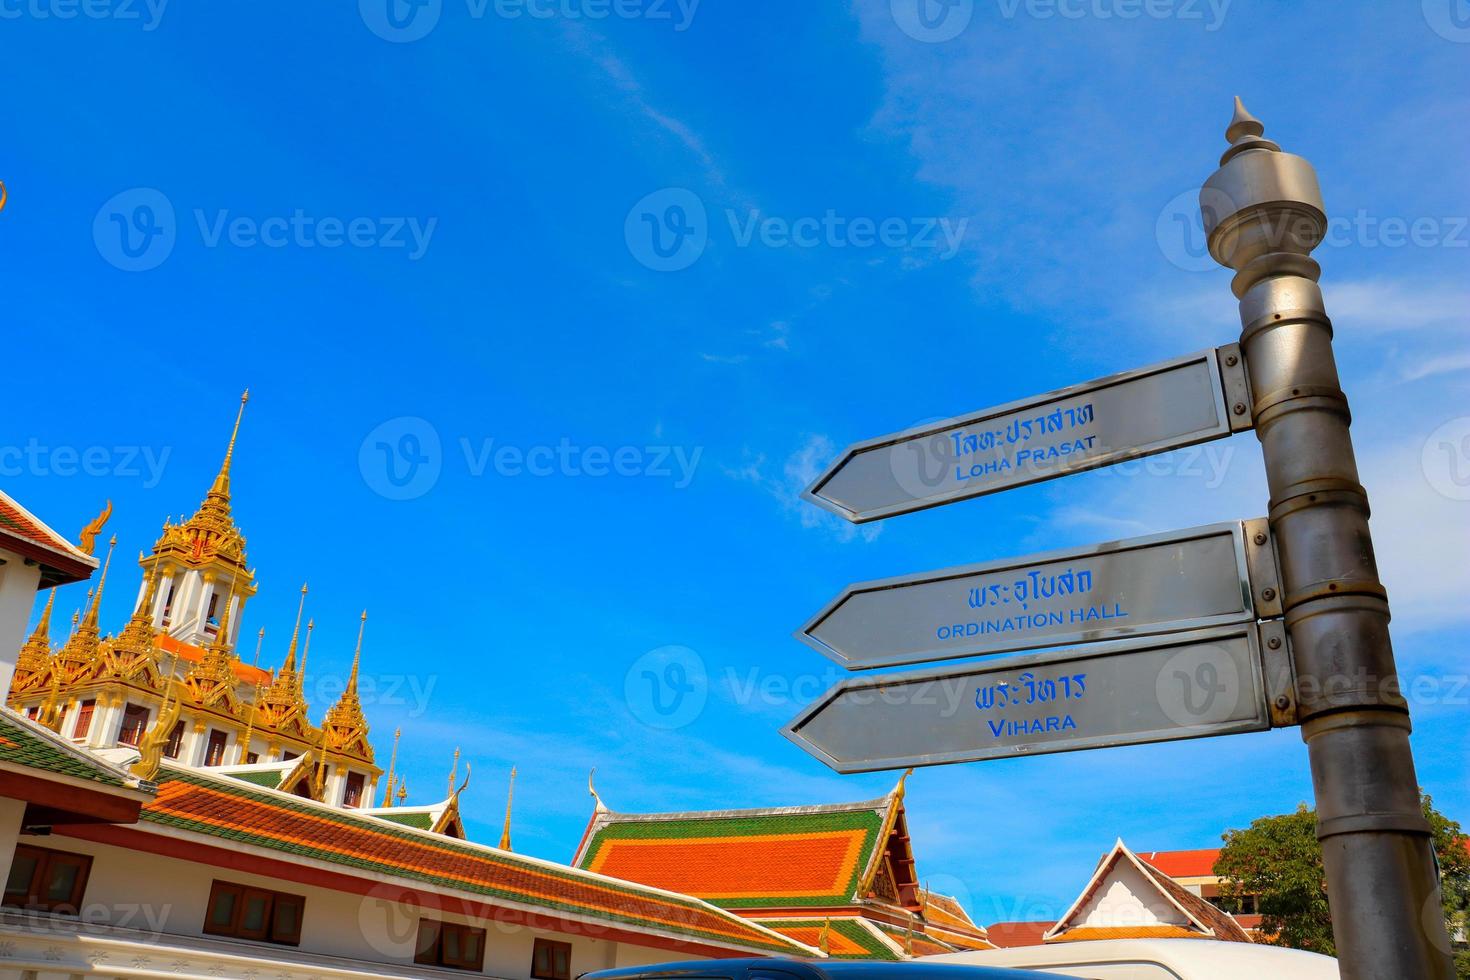 Roof temple on blue sky in Thailand. Temple name Wat Ratchanadda in Bangkok. photo